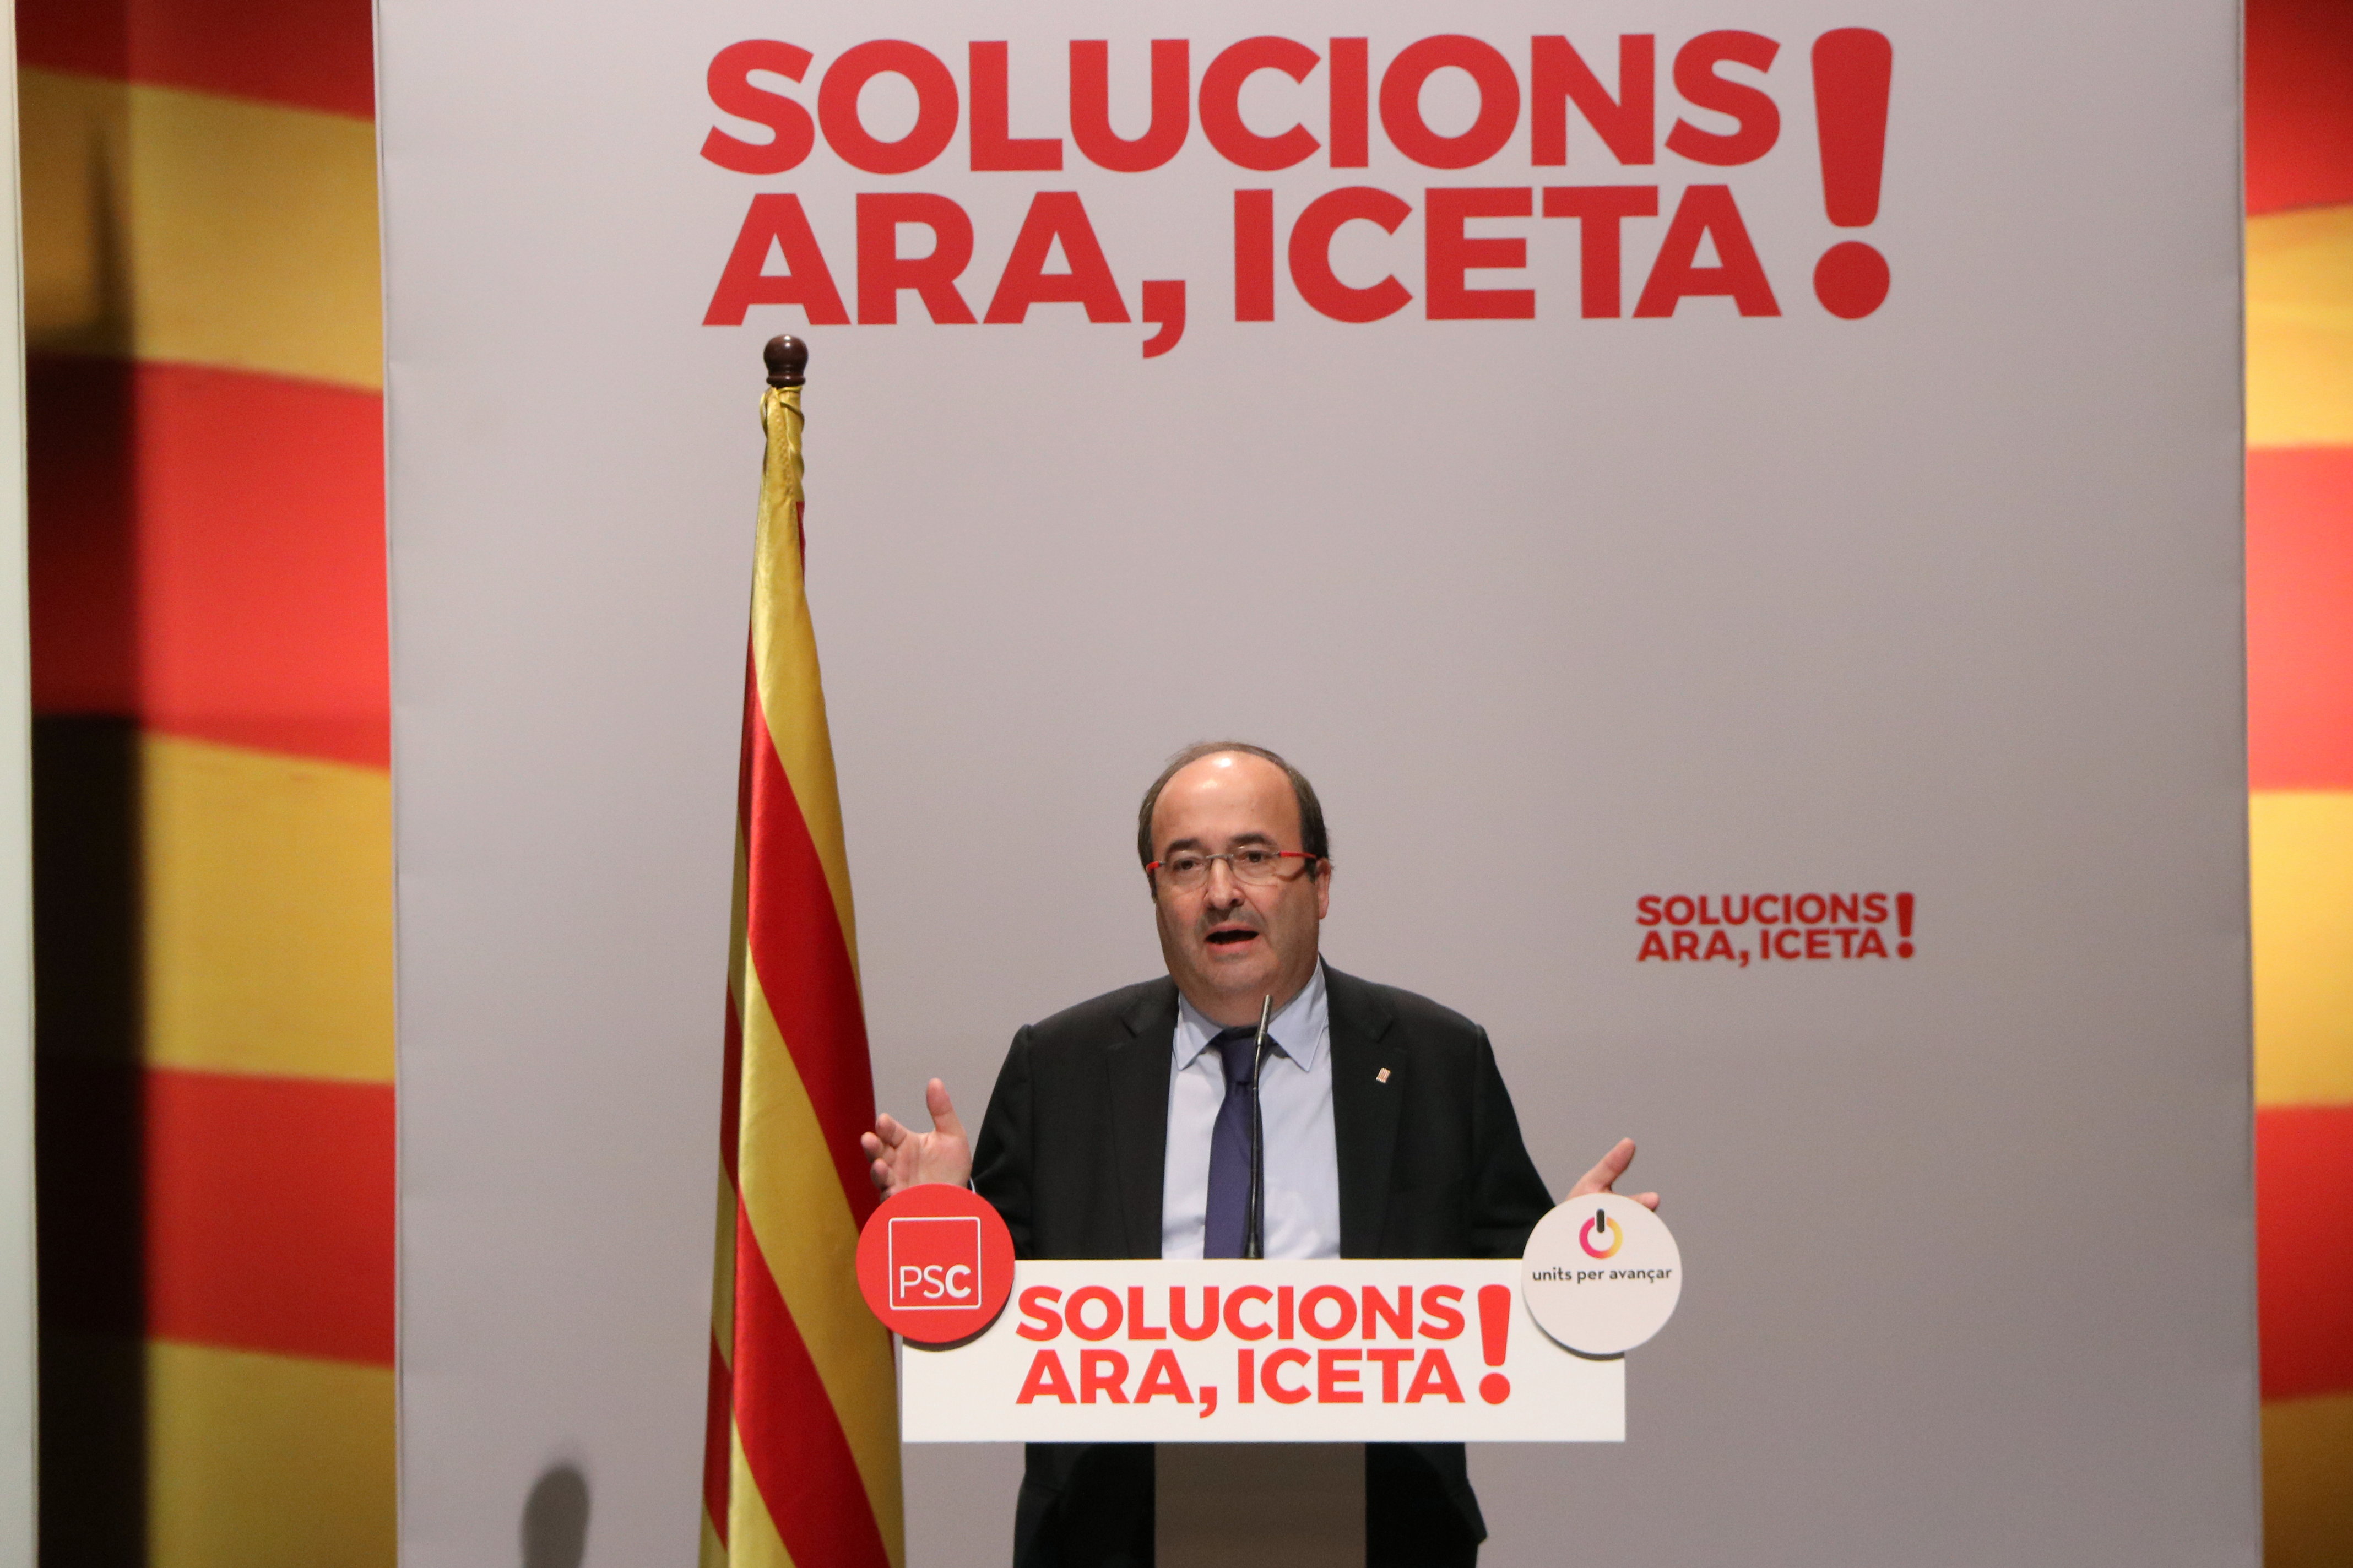 Miquel Iceta, leader of the Catalan Socialist Party, speaks at a campaign event on December 12 in Rubí (by Andrea Zamorano)